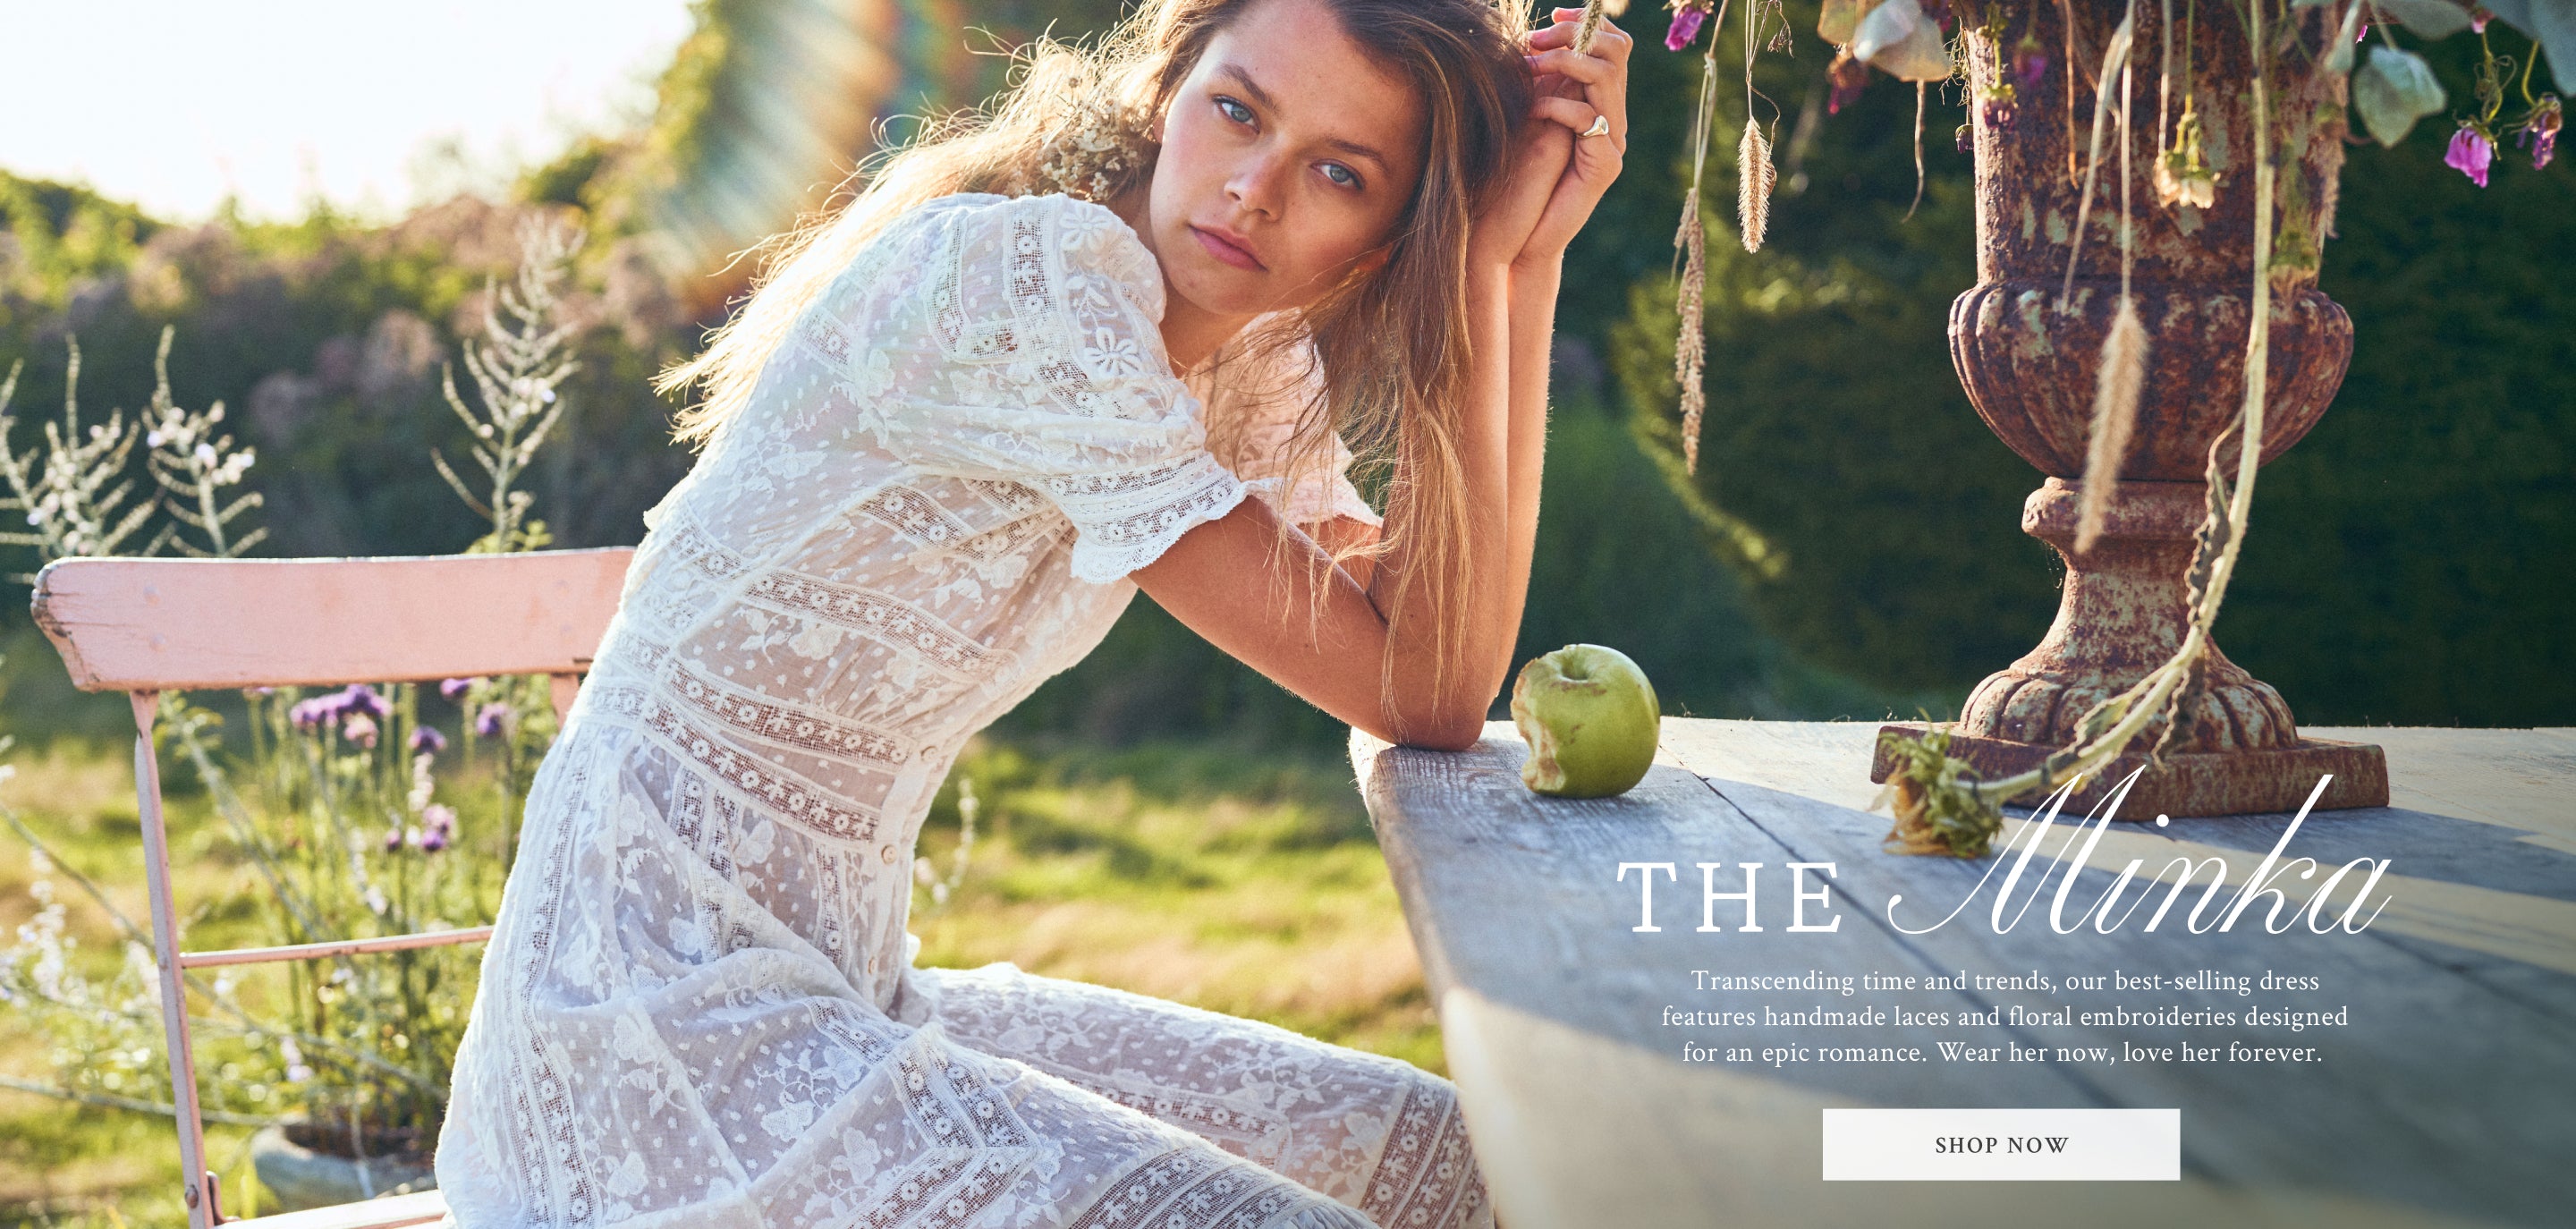 Transcending time and trends, our best-selling dress features handmade laces and floral embroideries designed for an epic romance. Wear her now, love her forever. Shop the Minka.